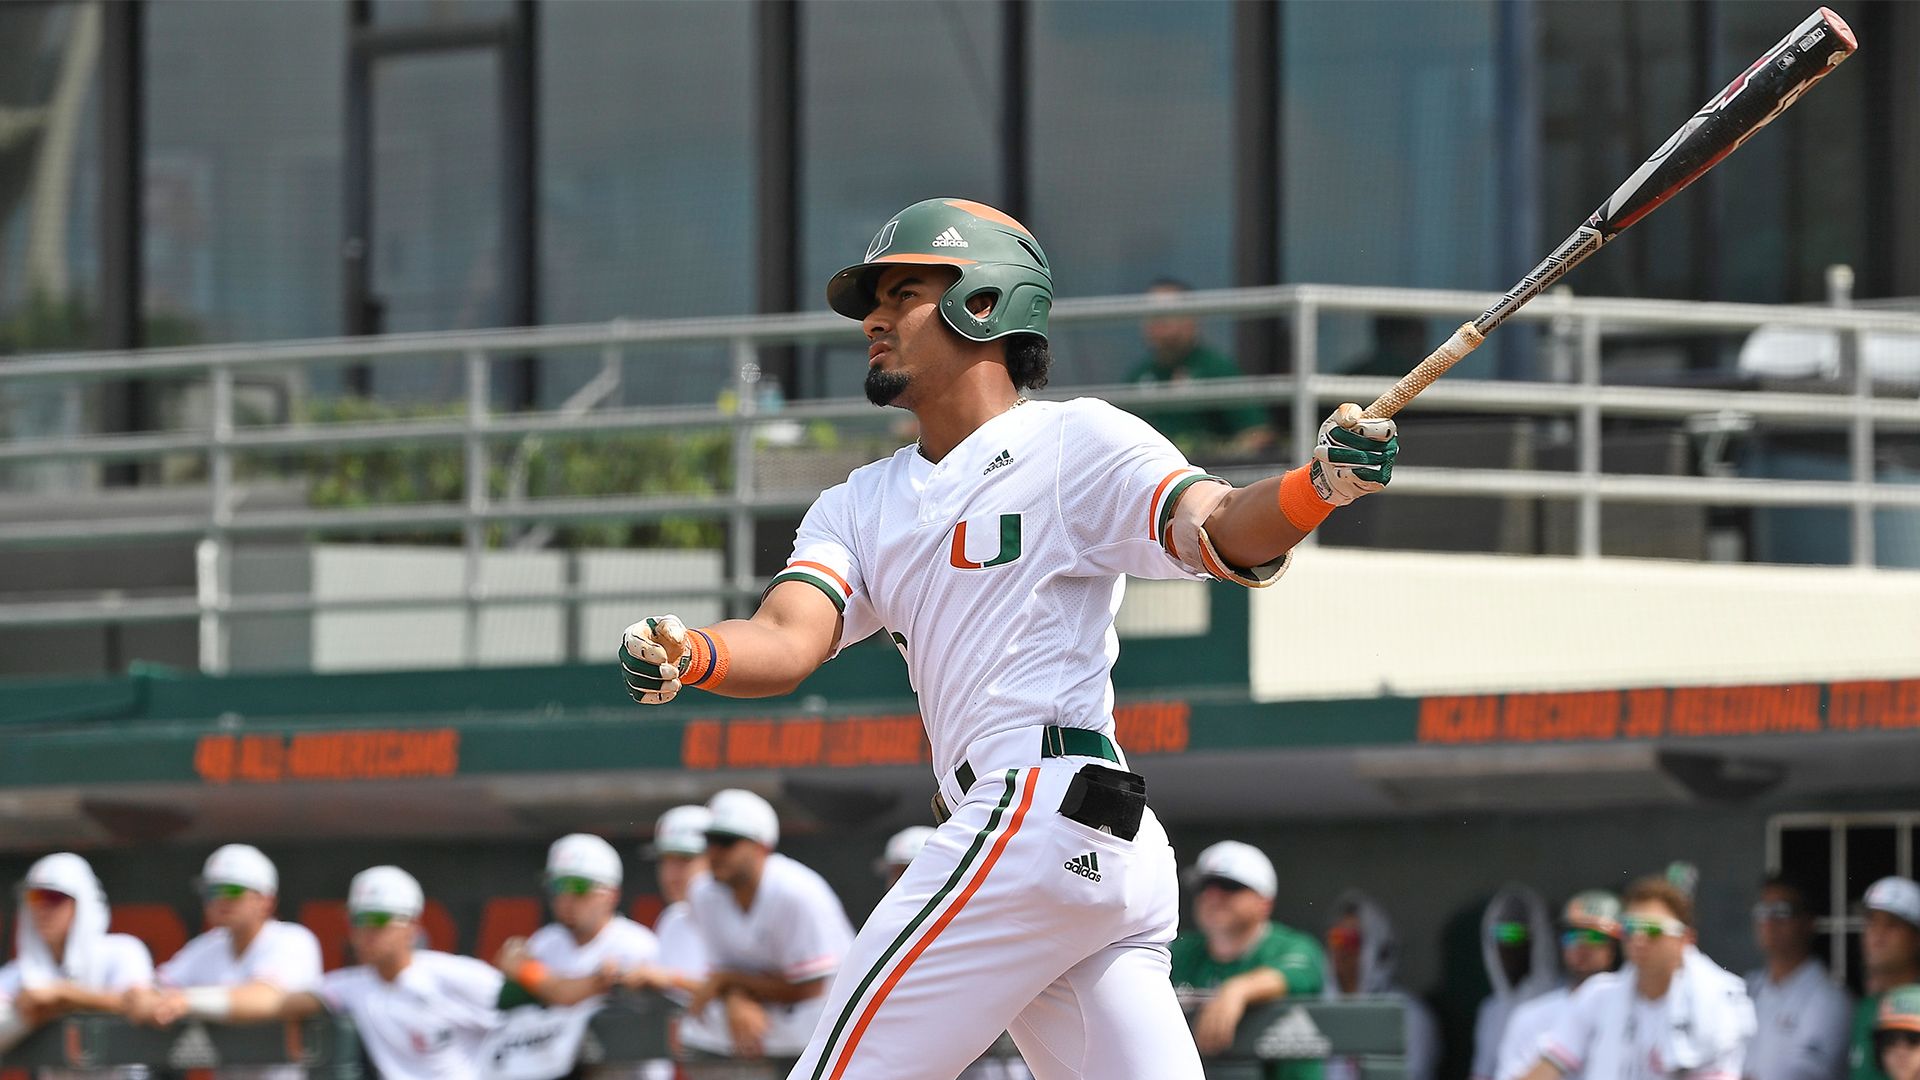 Canes Take Series with 9-6 Win Over Georgia Tech